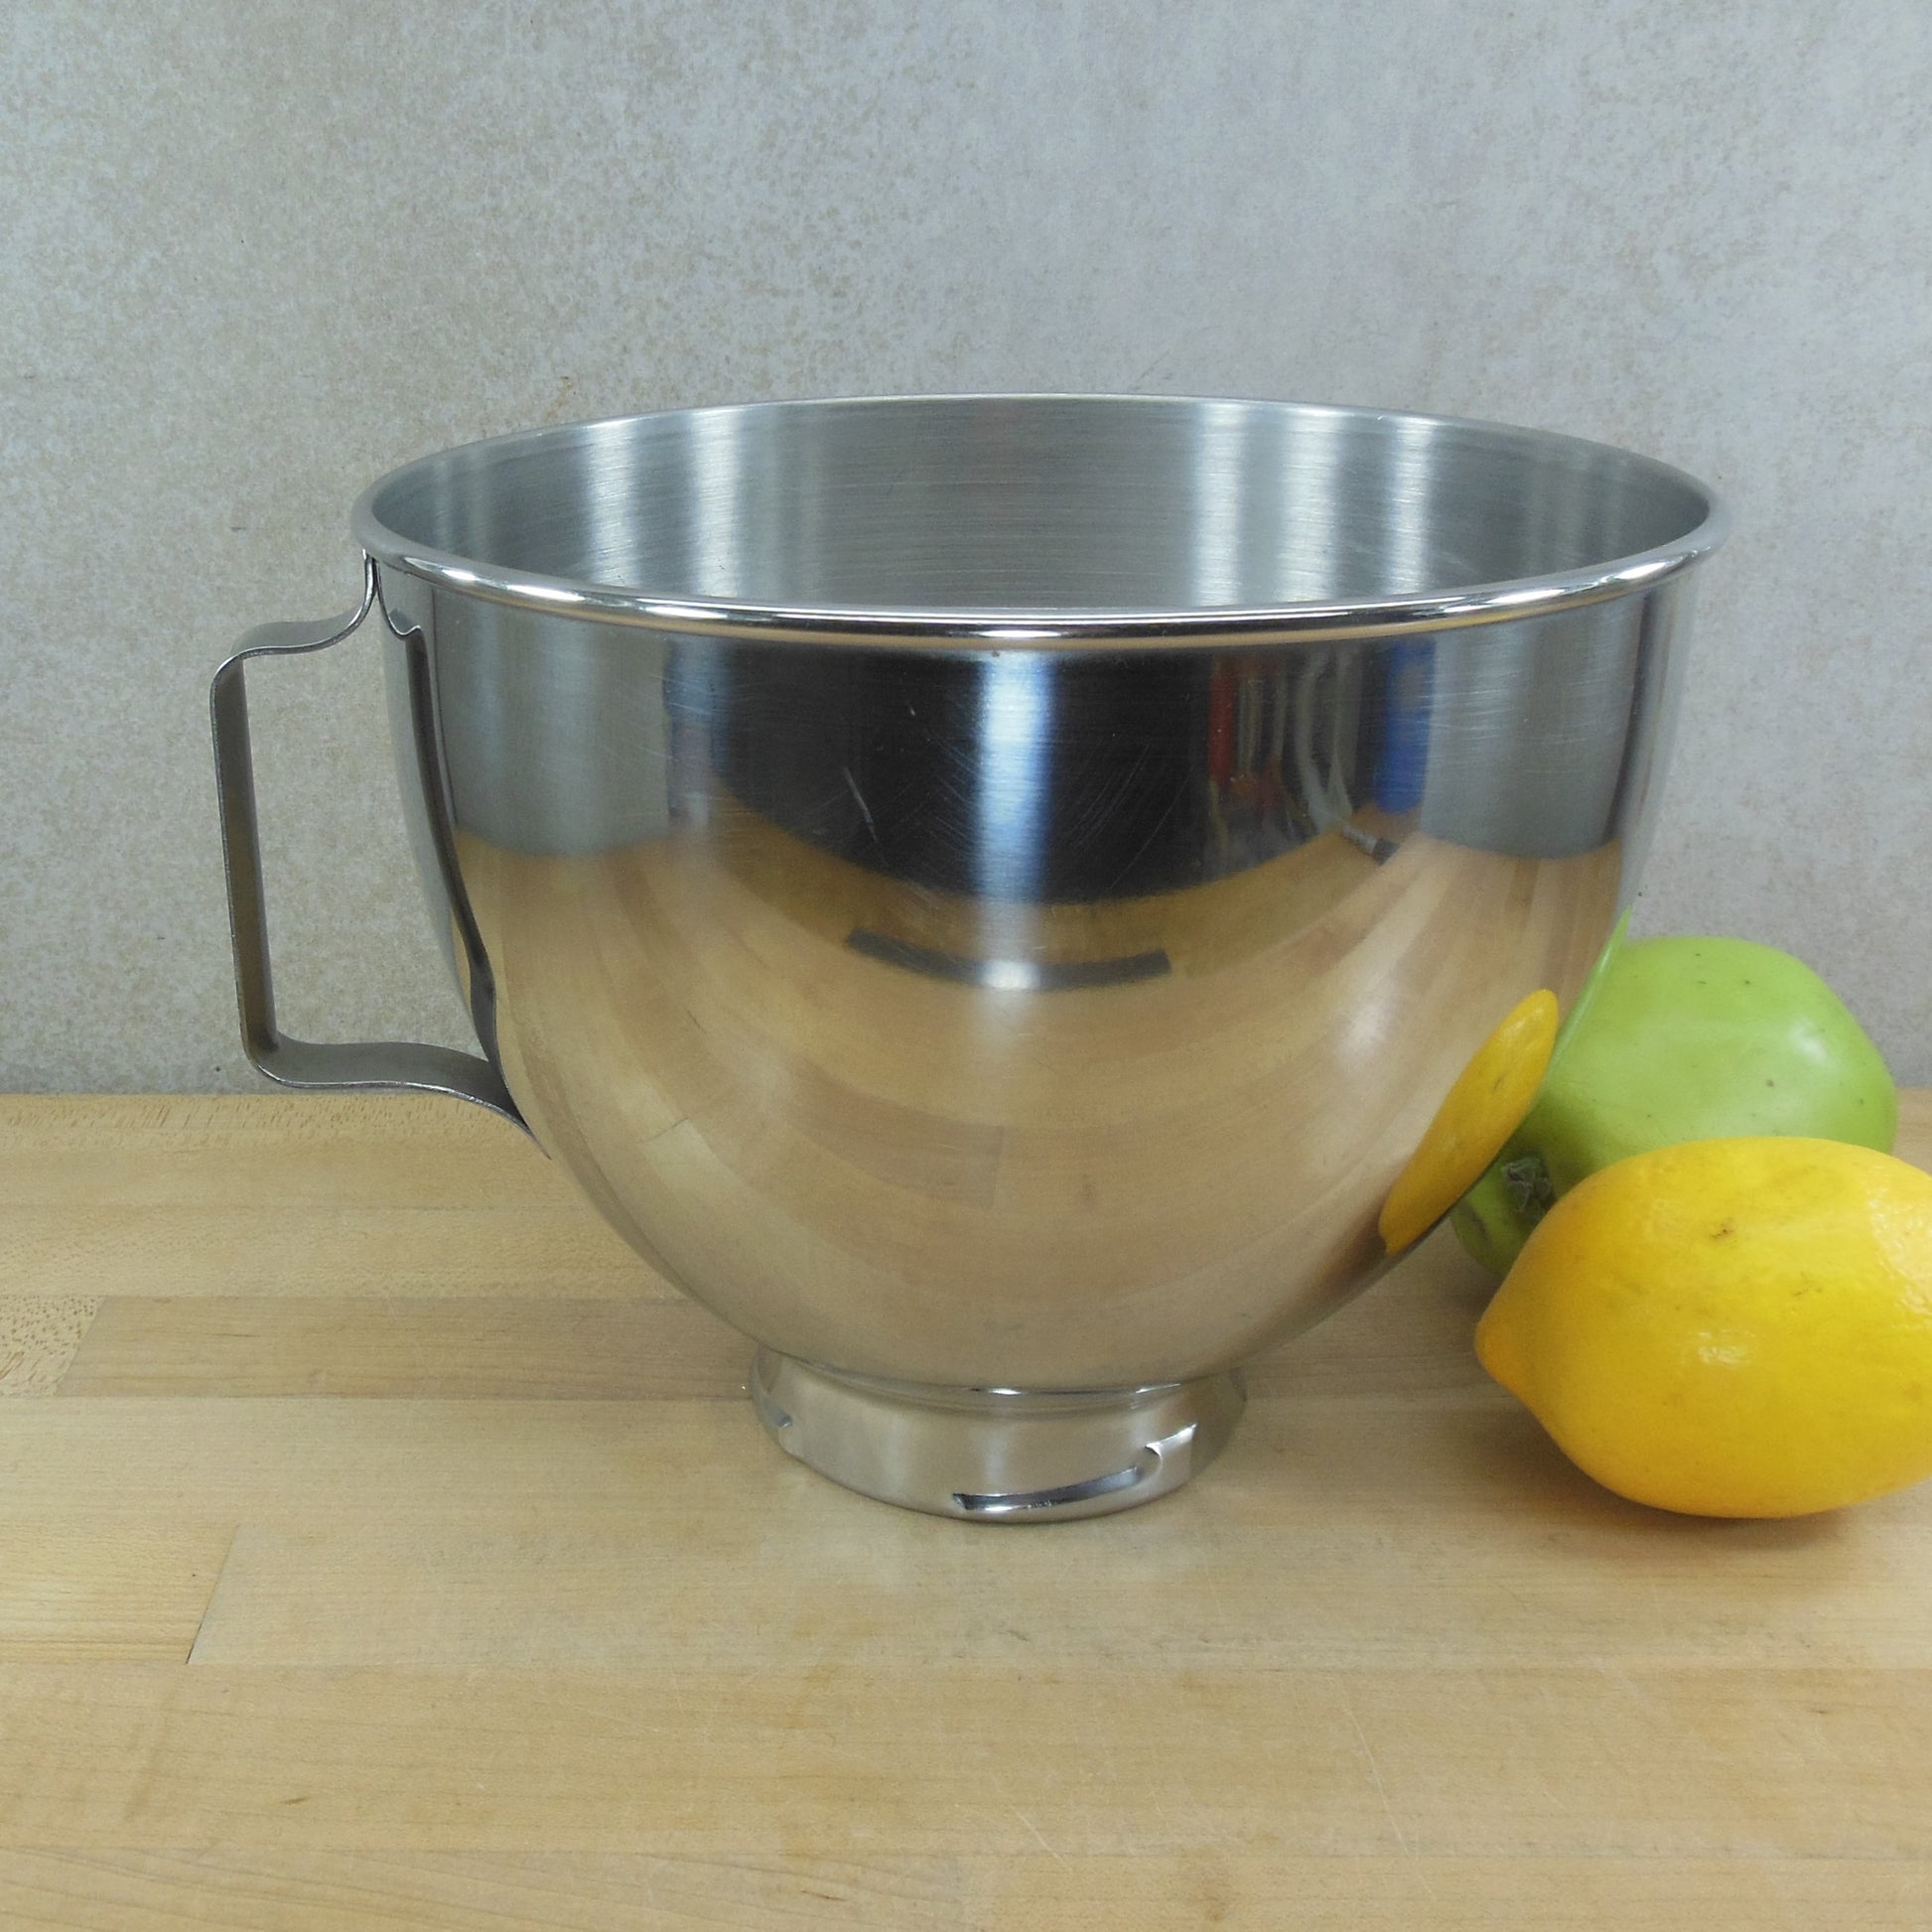 Kitchenaid 4.5 QT Bowl NEW in Box for Stand Mixer Stainless Steel